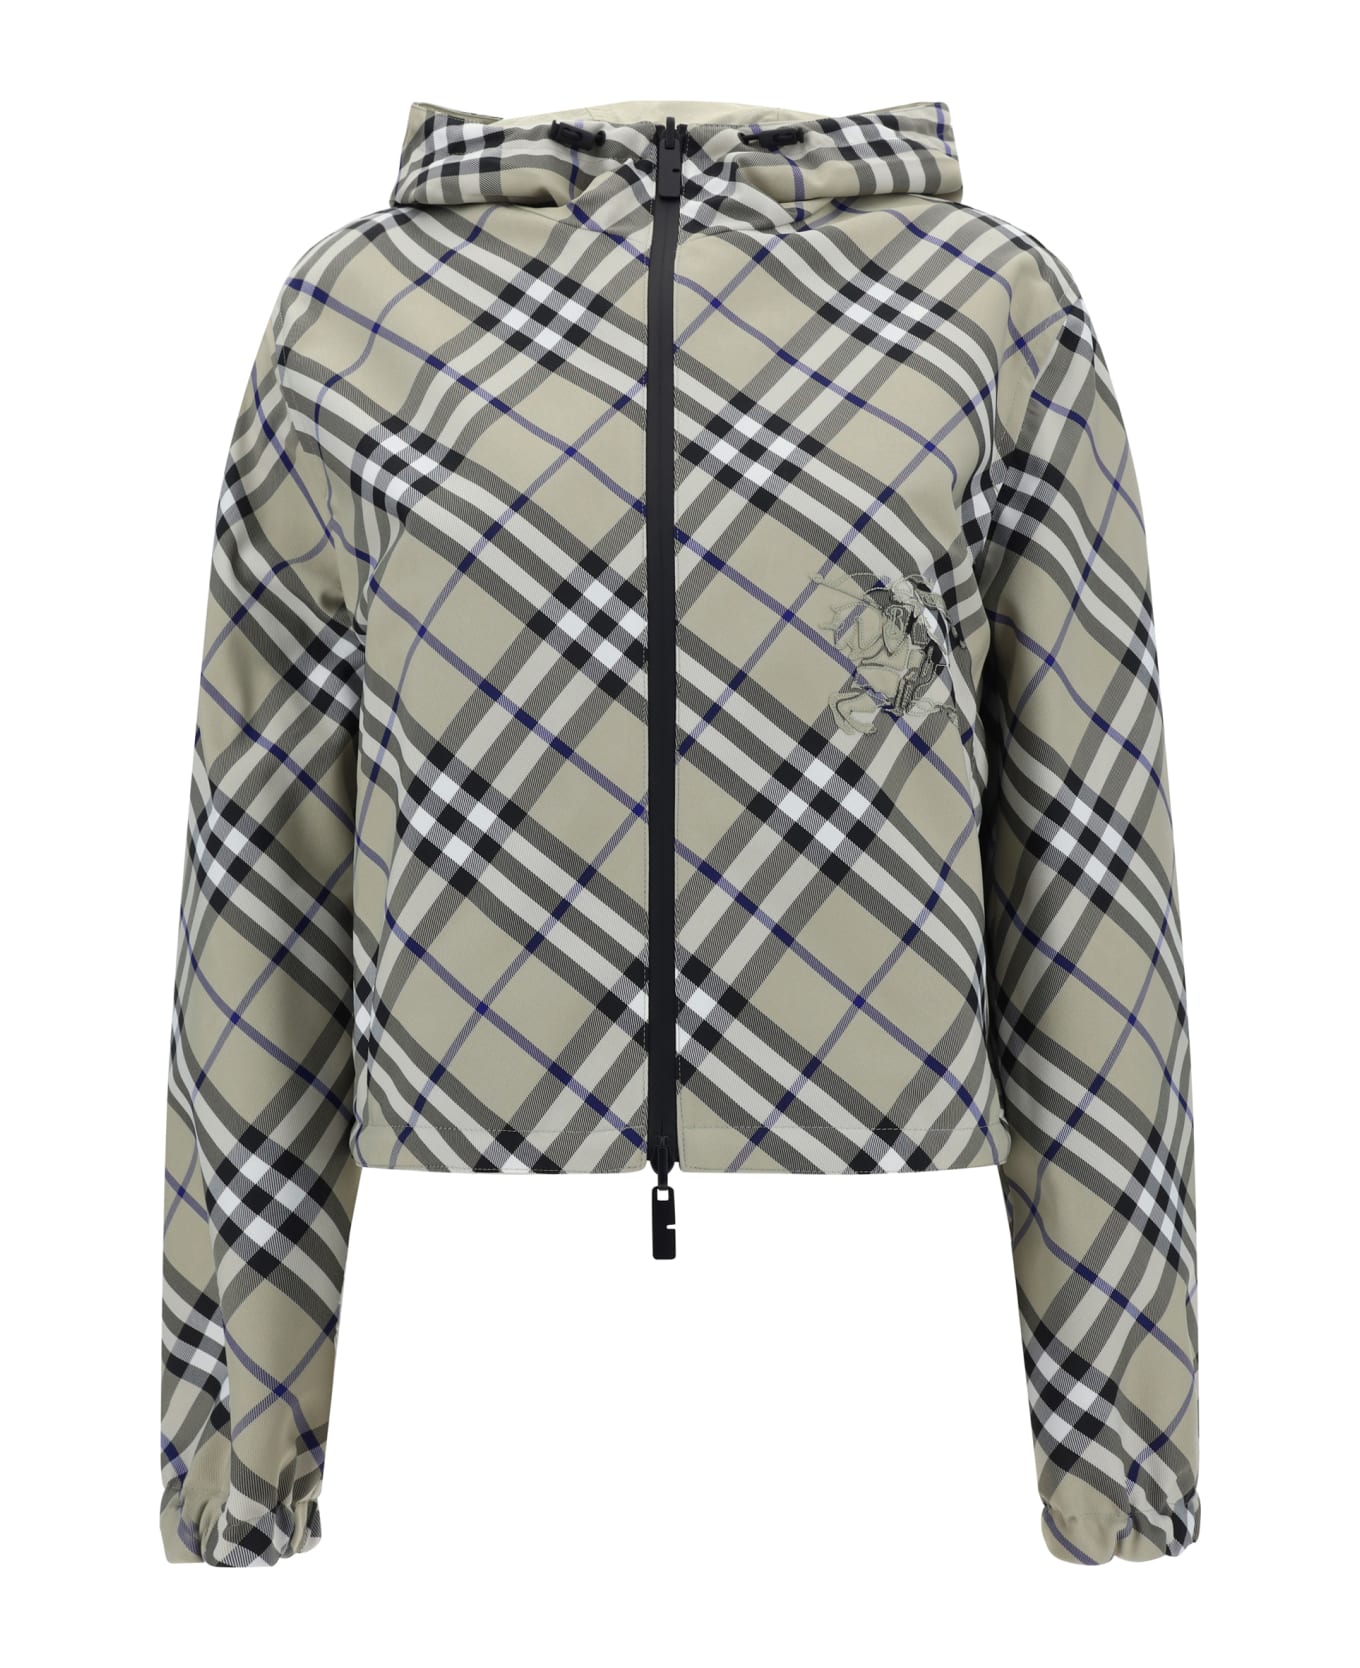 Burberry Reversible Cropped Checked Hooded Jacket - Lichen Ip Check